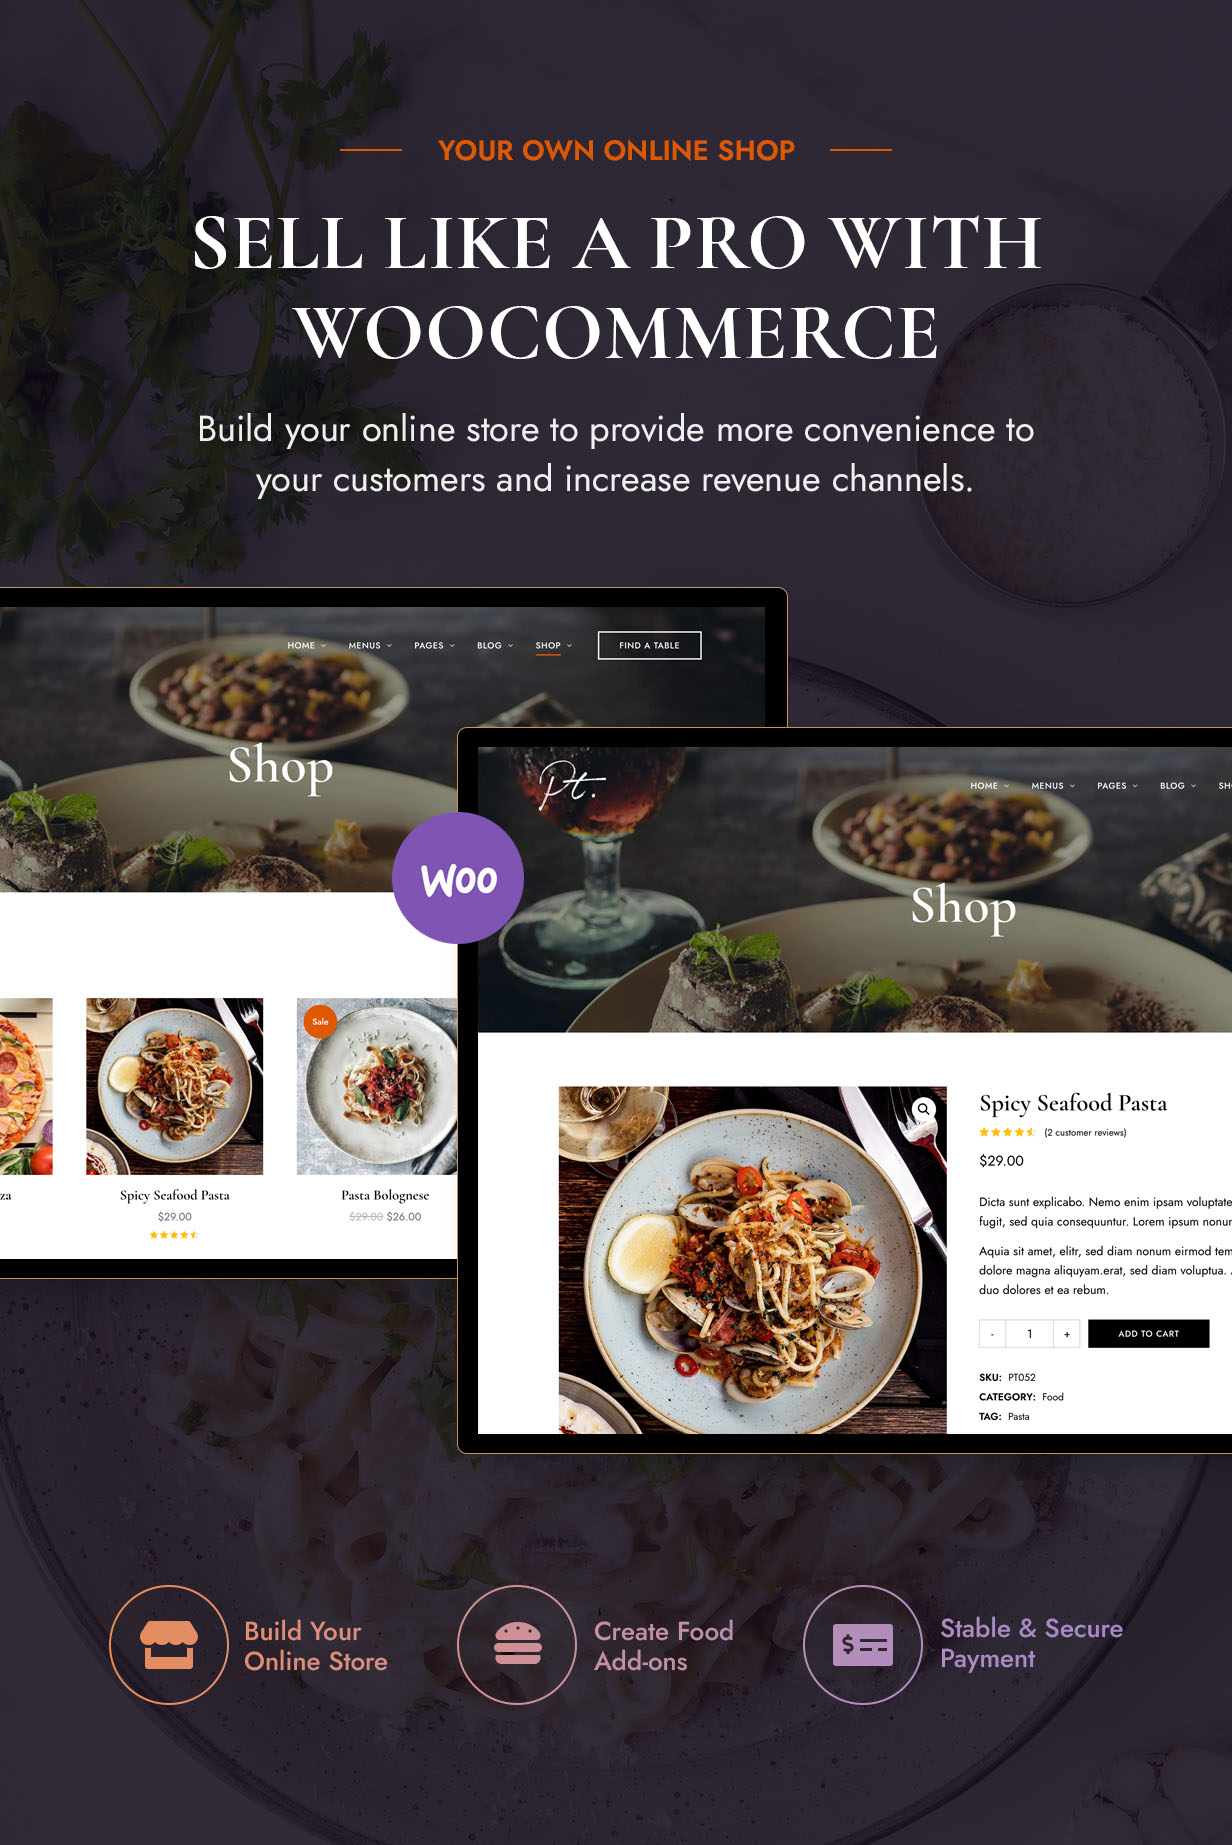 Sell like a pro with woocommerce.